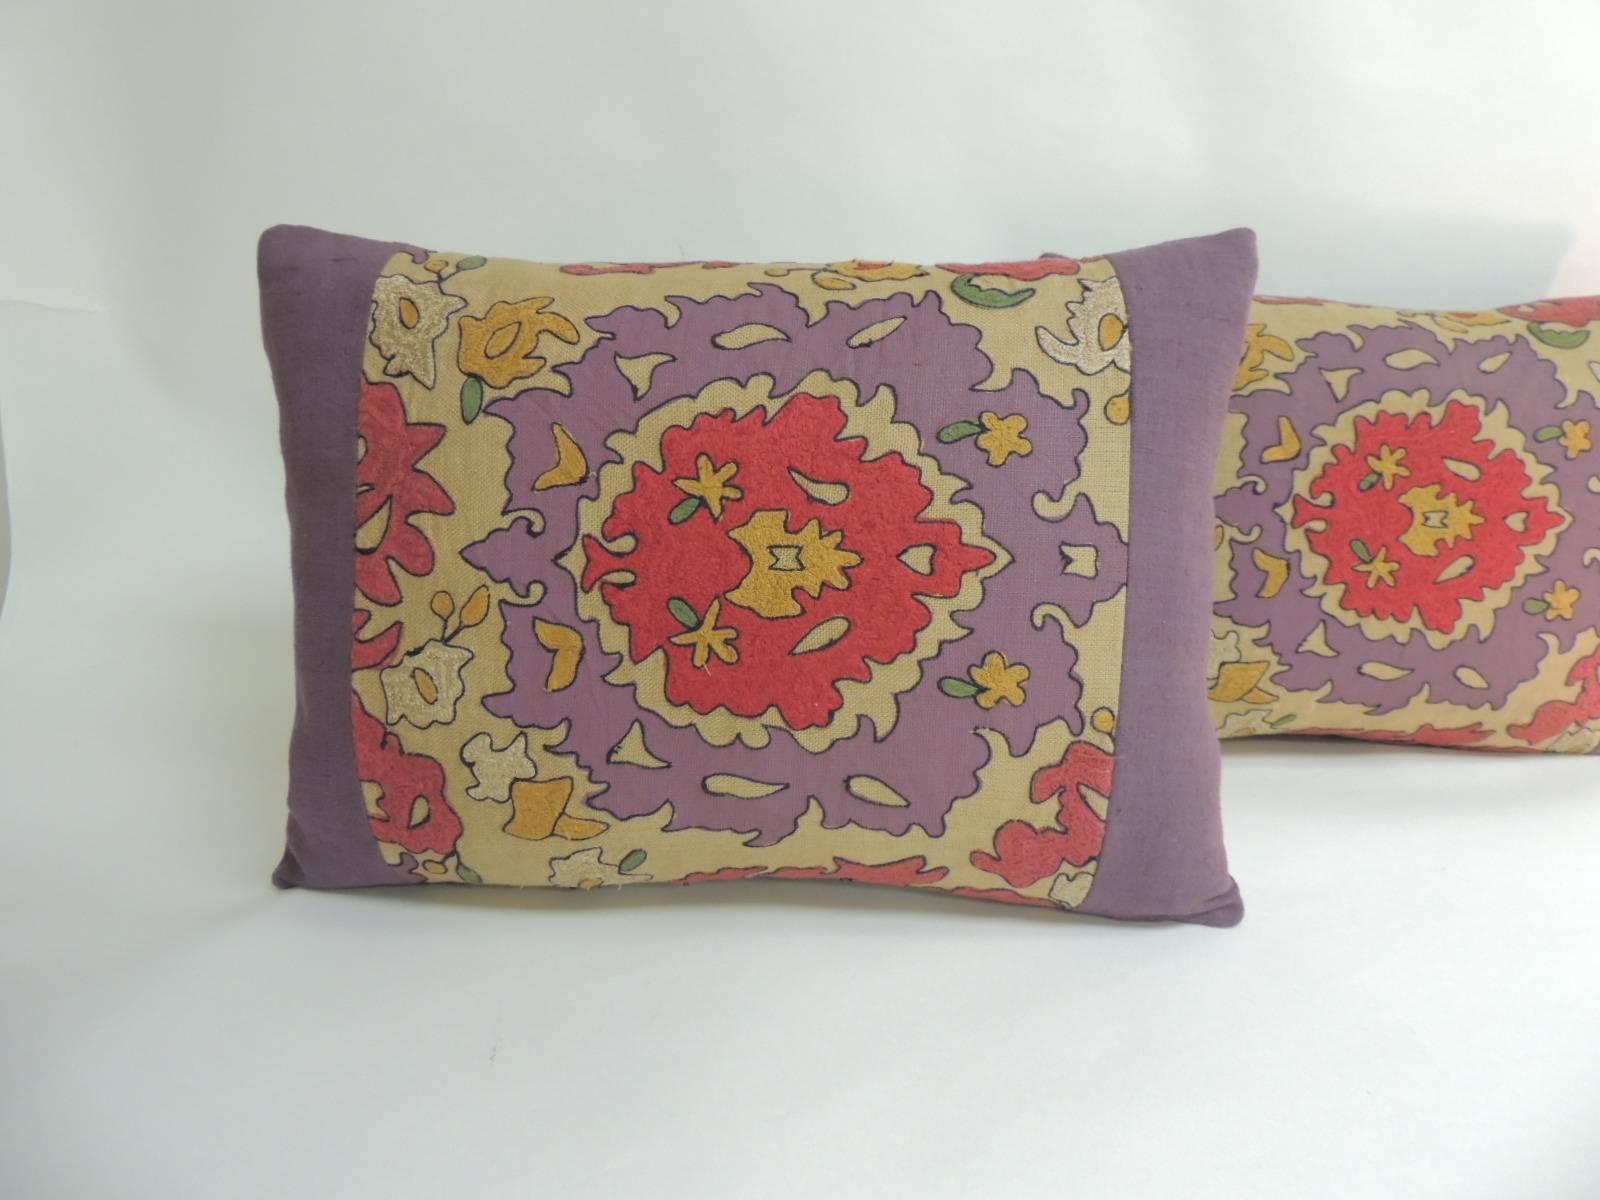 Pair of vintage Suzani embroidery purple decorative pillows
Pair of lumbar linen pillows framed with home-spun purple linen and same backings. In shades of purple, yellow, orange, ecru, green red, black and yellow.
 Decorative pillows handcrafted